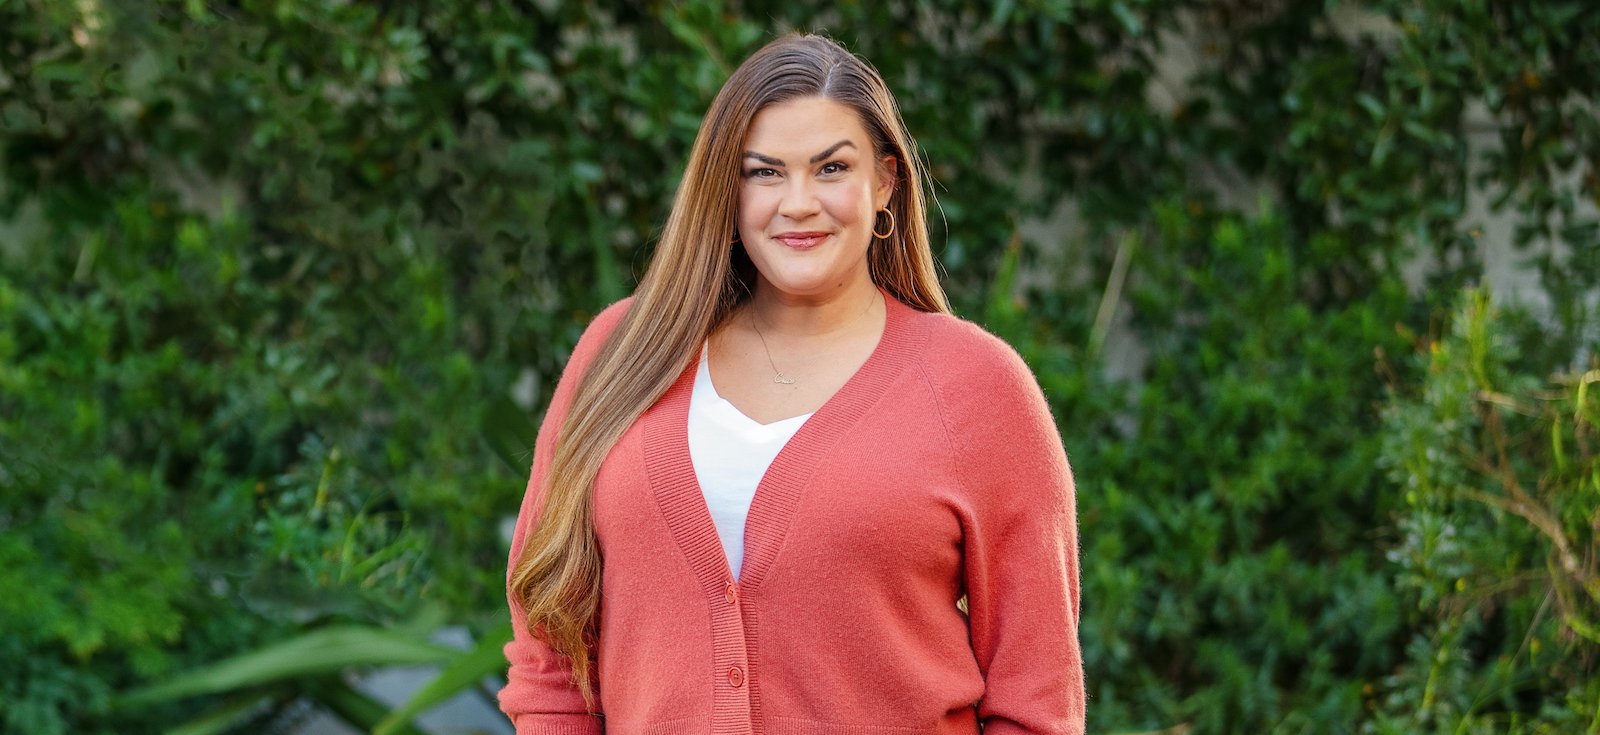 Brittany Cartwright from 'Vanderpump Rules' discusses her weight loss journey